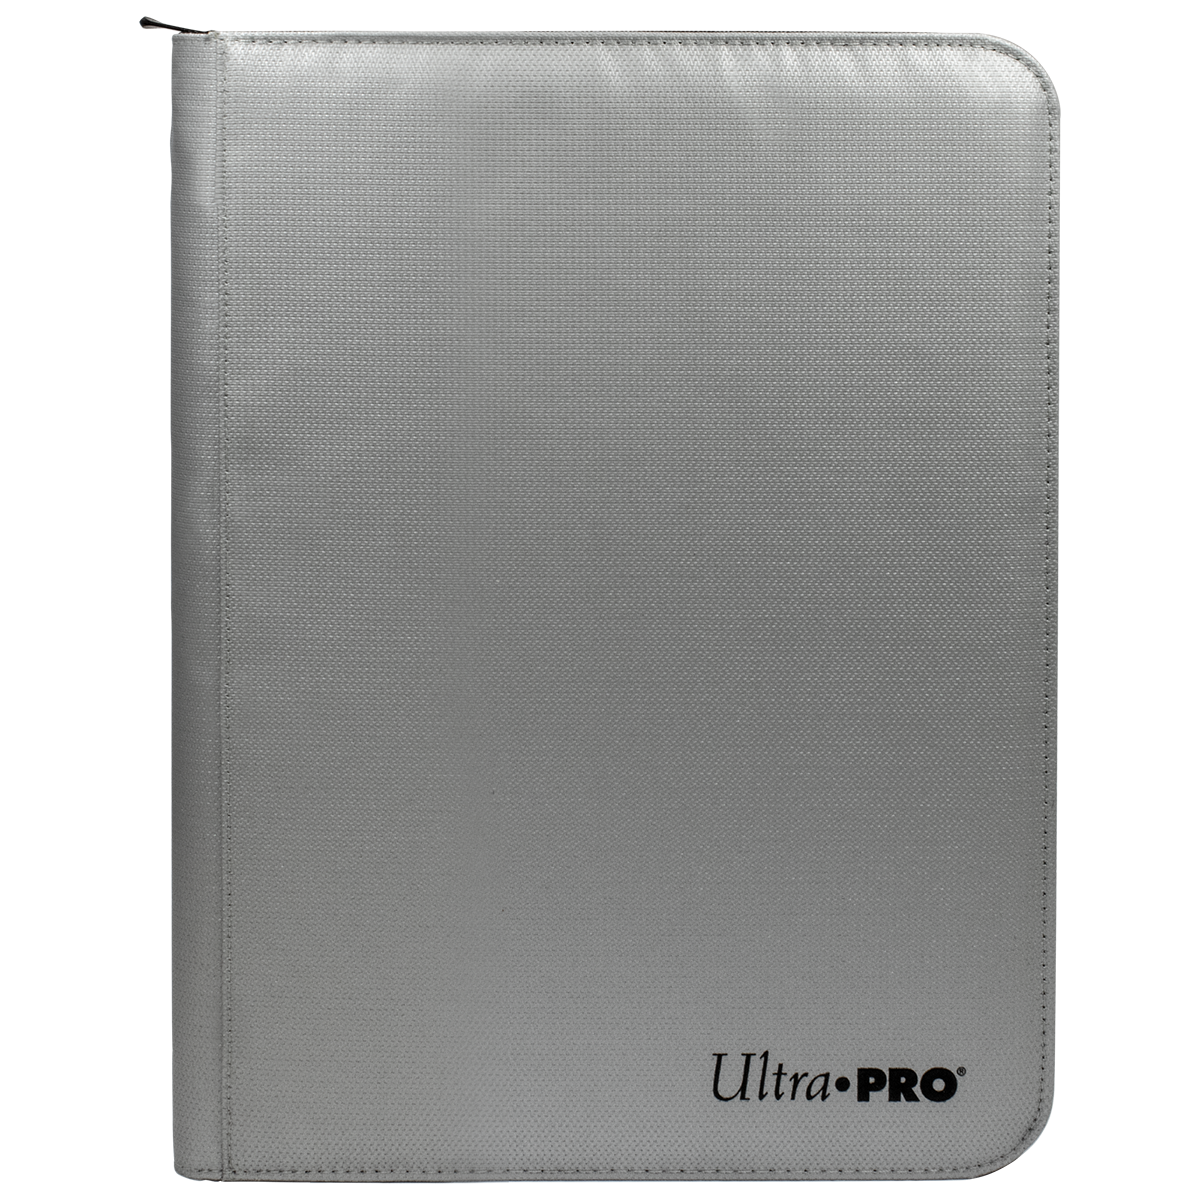 Ultra Pro 9-Pocket Silver Series Page Protector for Standard Size